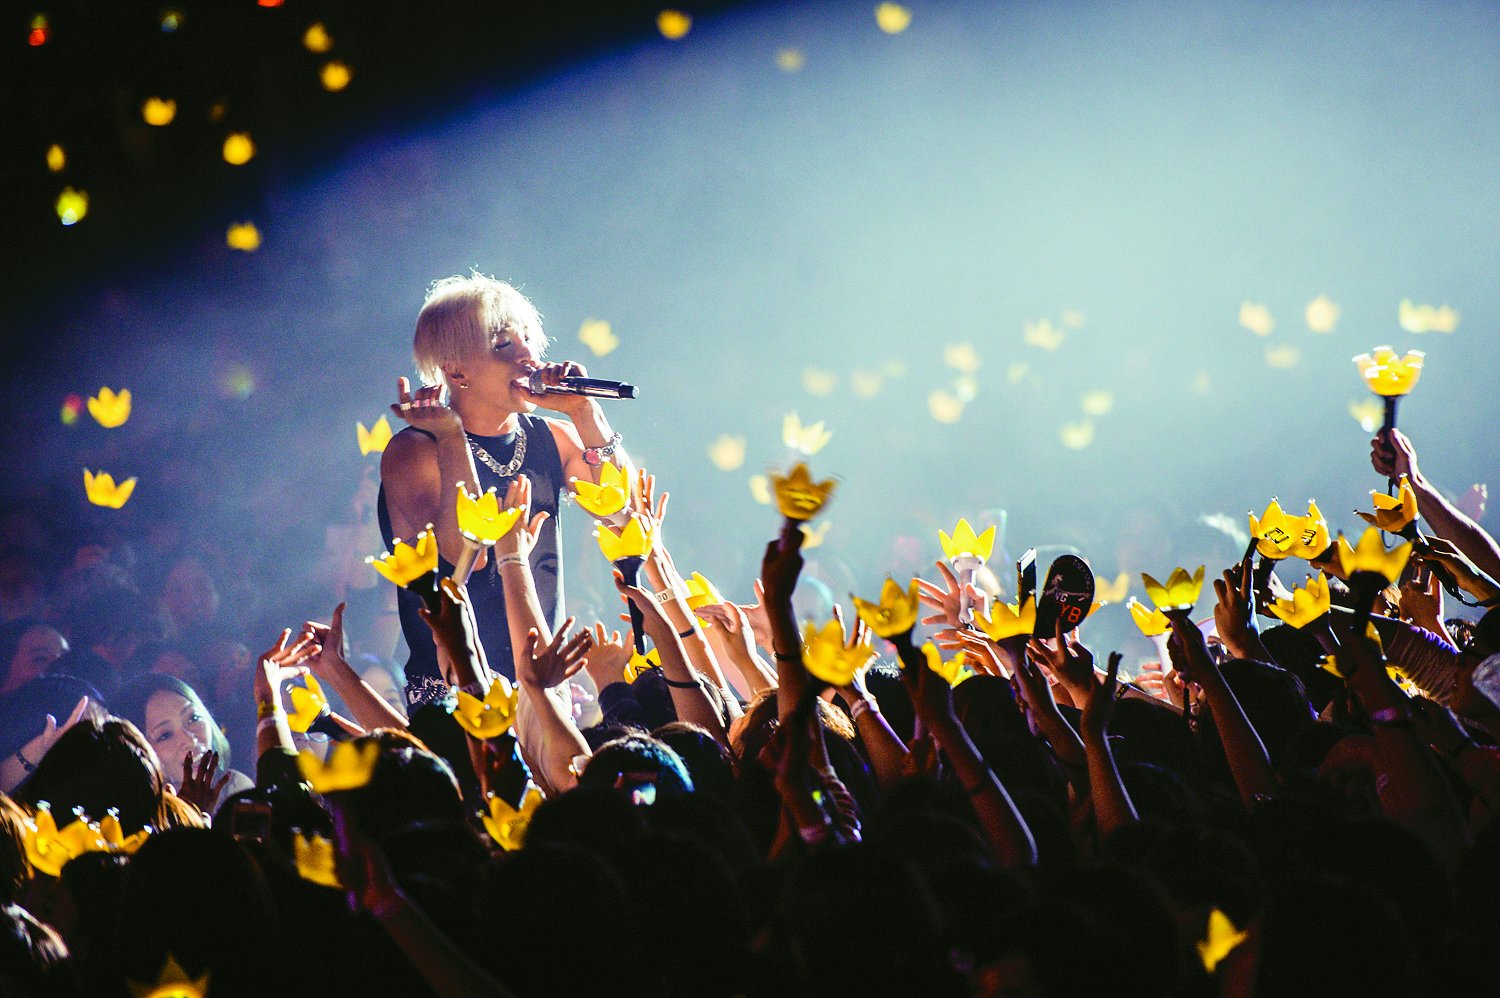 VIP's iconic crown light stick. VIP is the name of BigBang's official fan club.